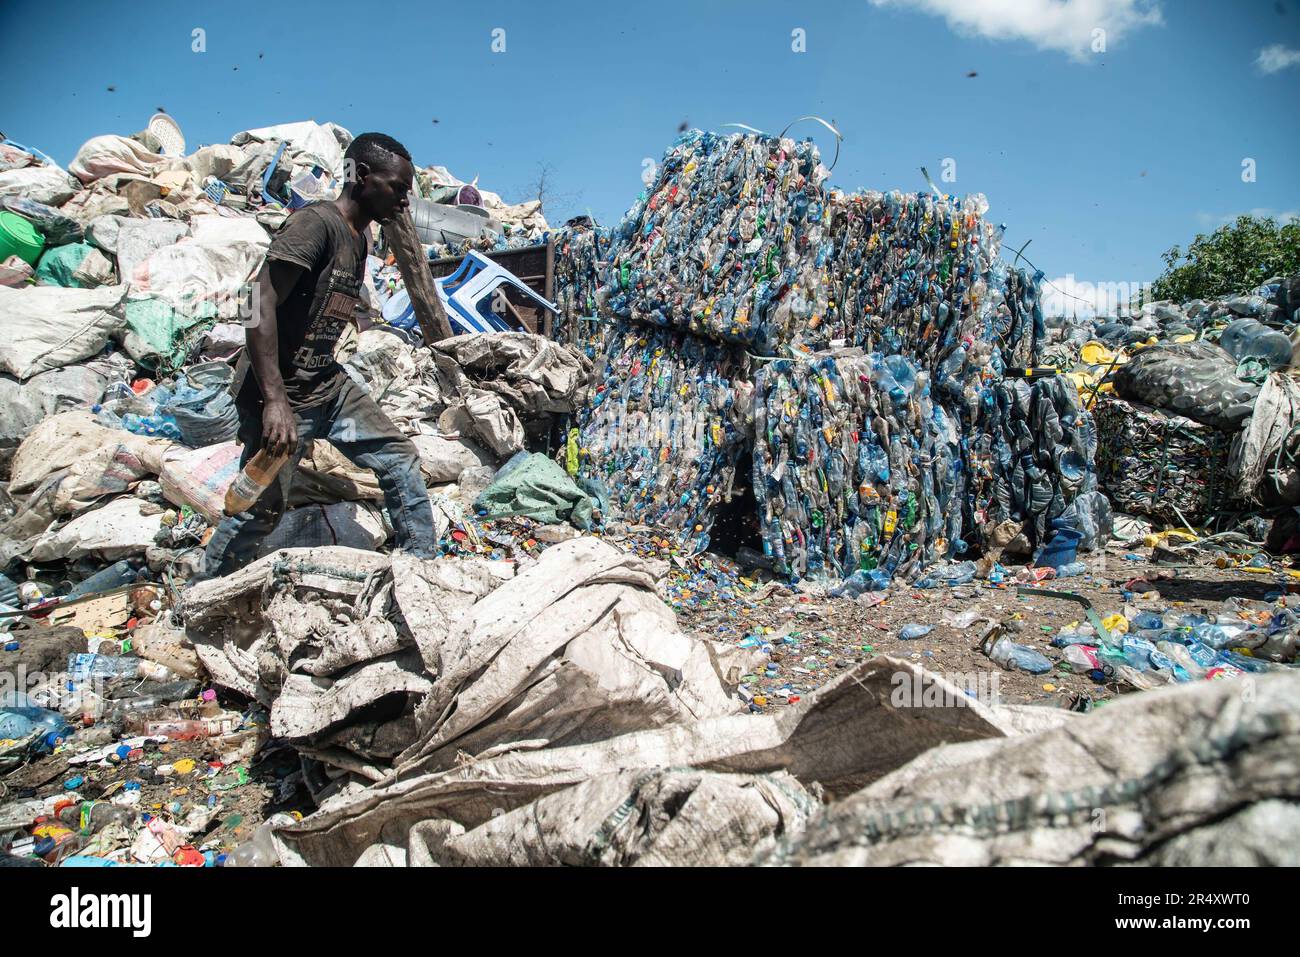 A worker is seen at a plastic recycling plant in Nakuru. Negotiators have gathered in Paris, France for the second round of deliberations to develop a global treaty aimed at tackling the escalating issue of plastic pollution. According to a recent report by the United Nations Environment Programme (UNEP), countries have the potential to reduce plastic pollution by 80% by 2040 by eliminating unnecessary plastics, implementing recycling and reuse strategies, introducing deposit return schemes, and substituting plastic with sustainable alternative materials. (Photo by James Wakibia/SOPA Images/ Stock Photo